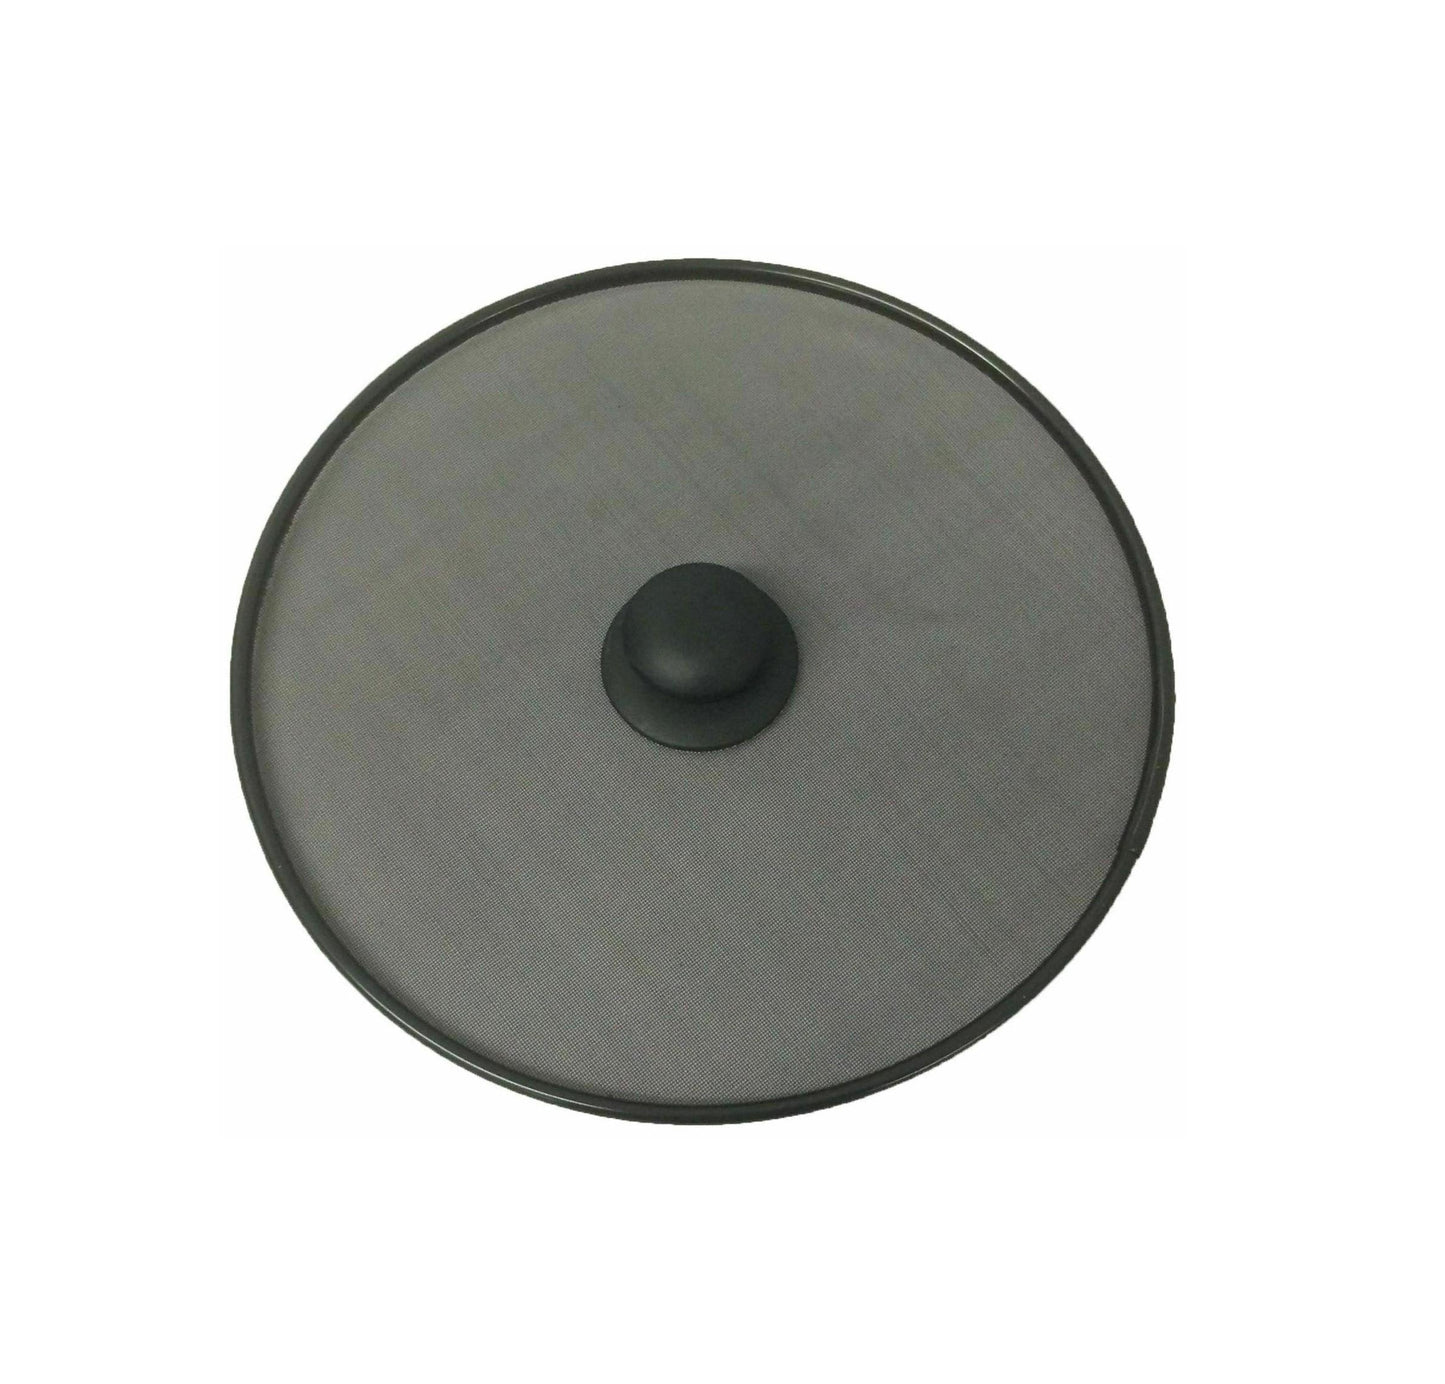 New Kitchen Frying Pan Splatter Screen Cover Guard Protective Lid Mesh 28 cm 0804 (Parcel Rate)